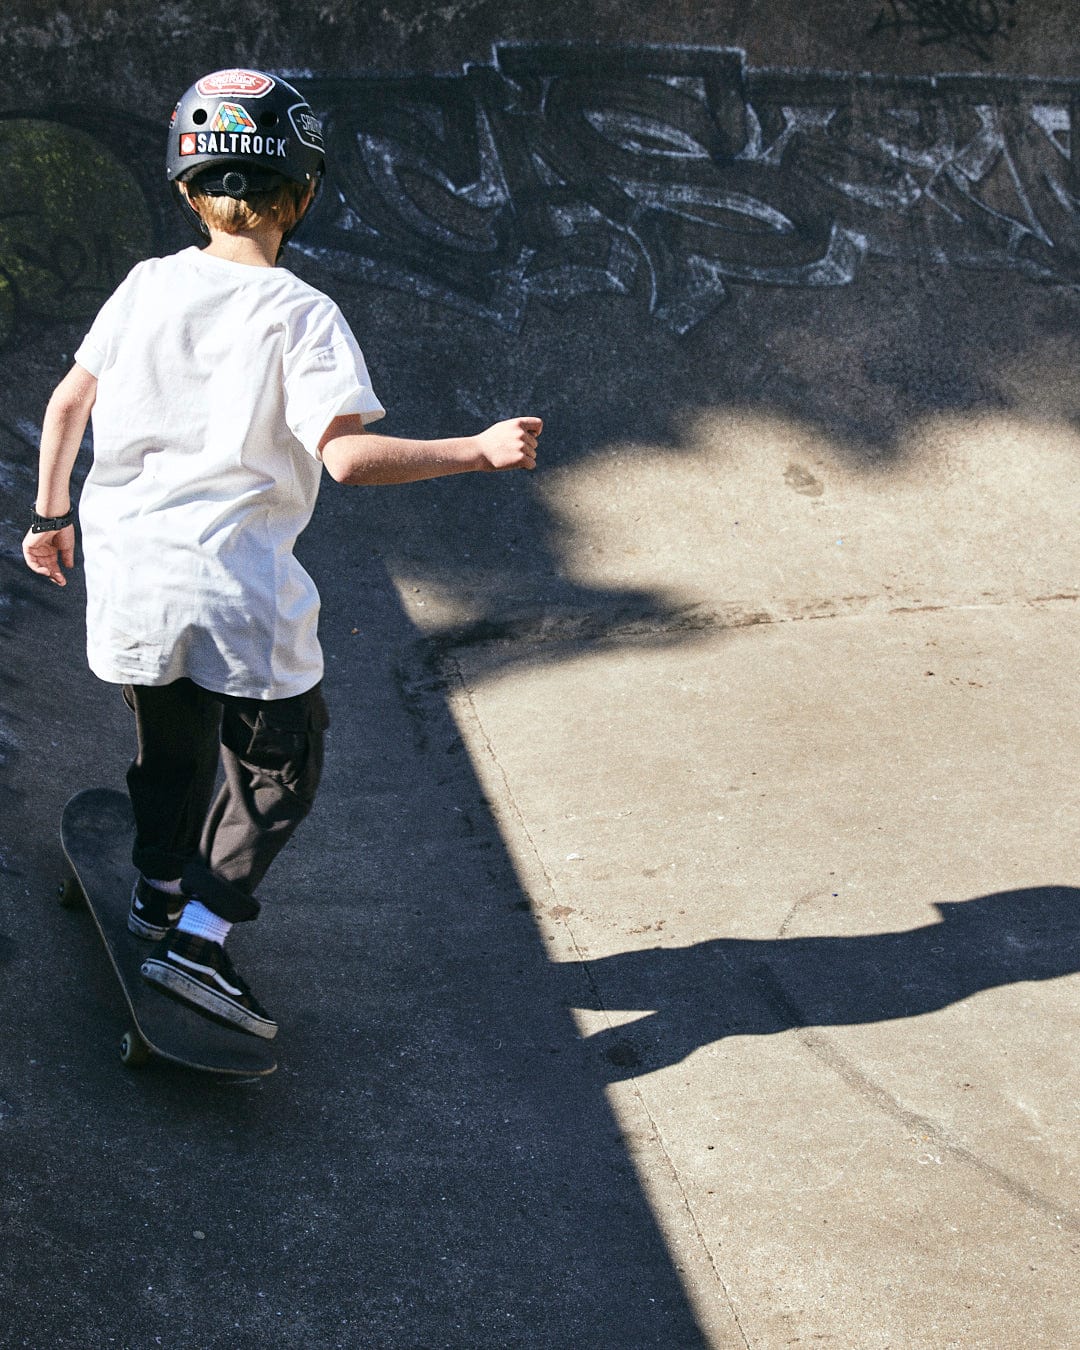 A person wearing a helmet and a Taco Tok - Kids Short Sleeve T-Shirt by Saltrock is skateboarding on a concrete surface at a skate park with graffiti.